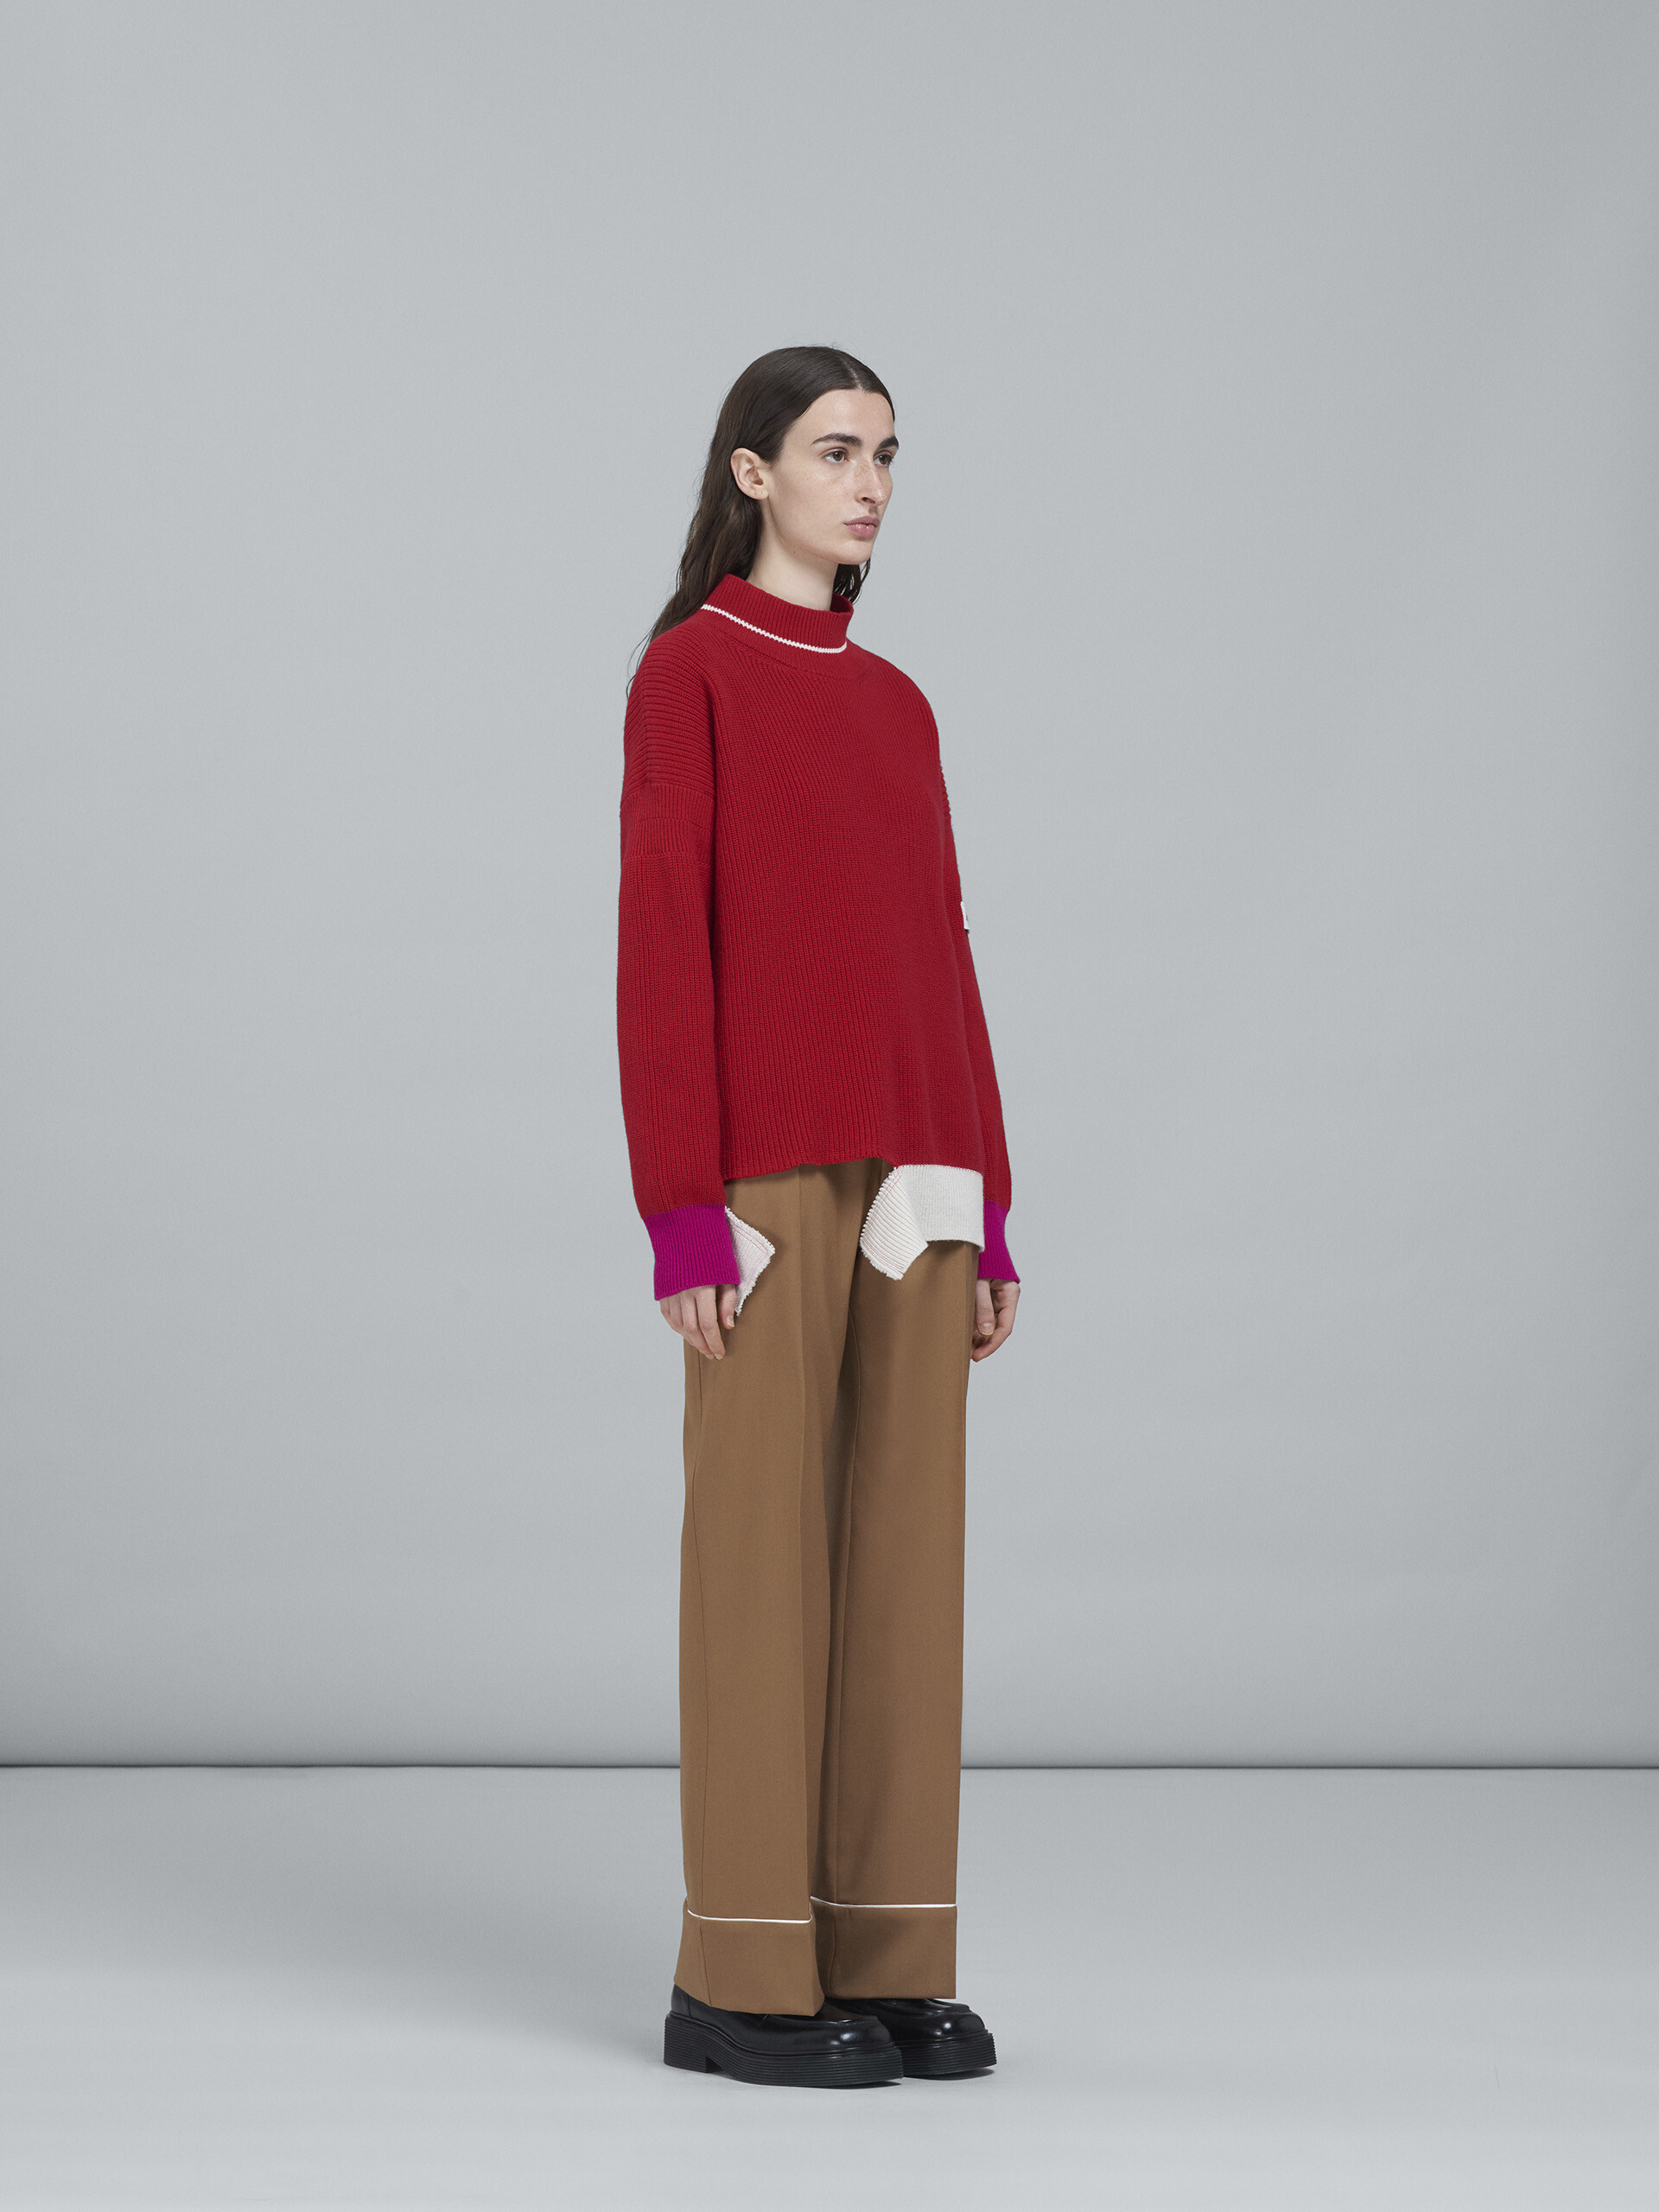 Shetland wool and cotton T-neck sweater - Pullovers - Image 5